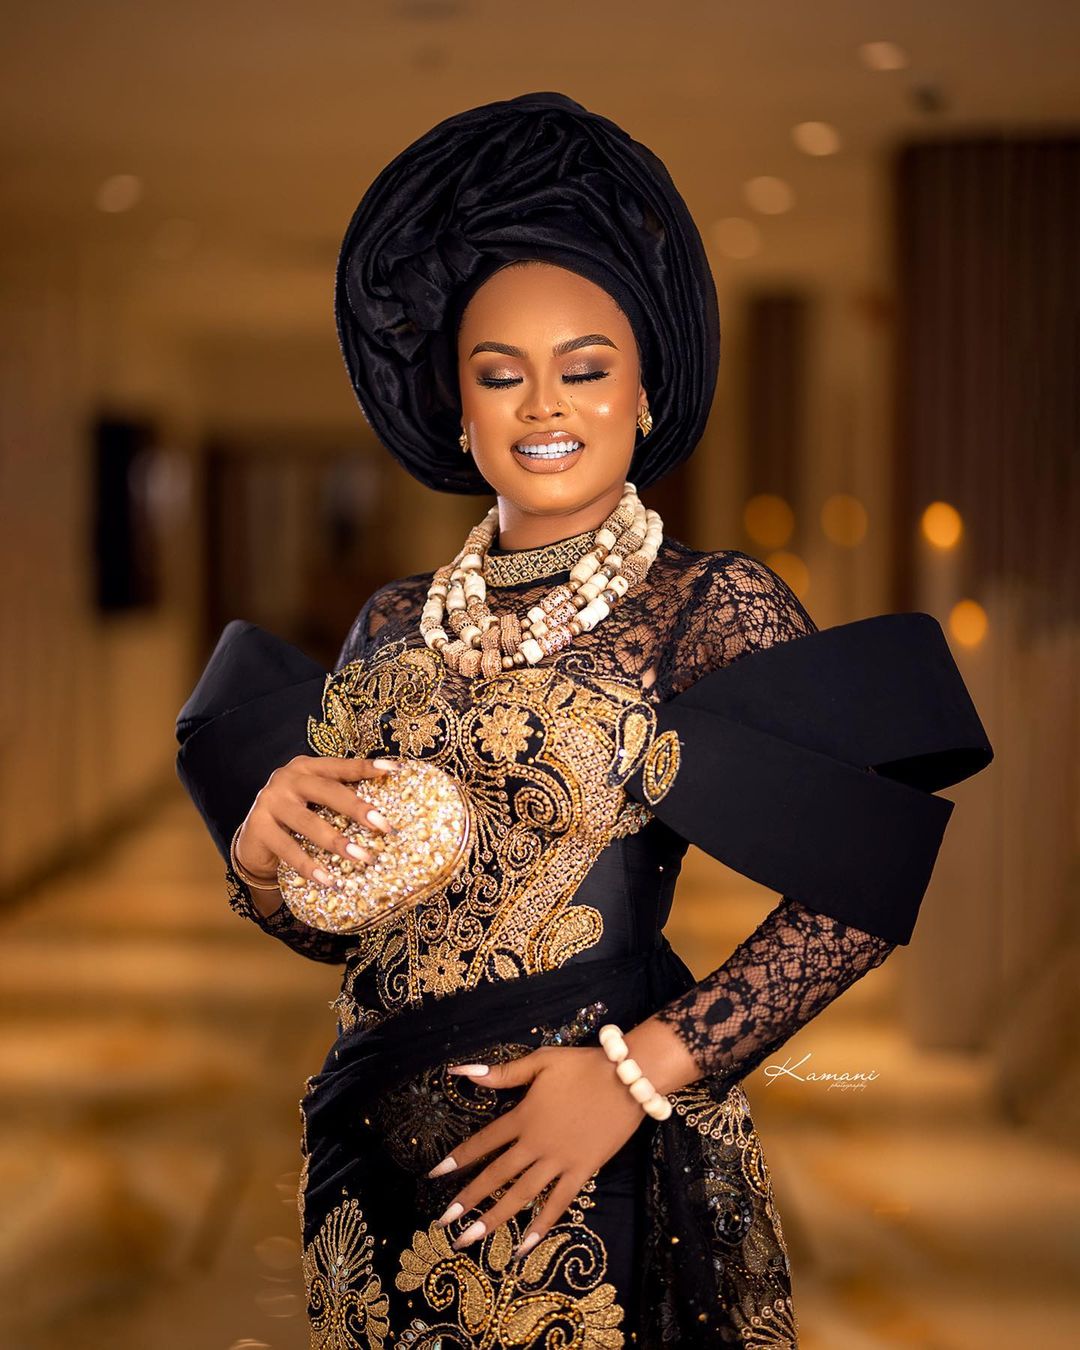 Get Your Trad Glam On With This Stylish Beauty Look